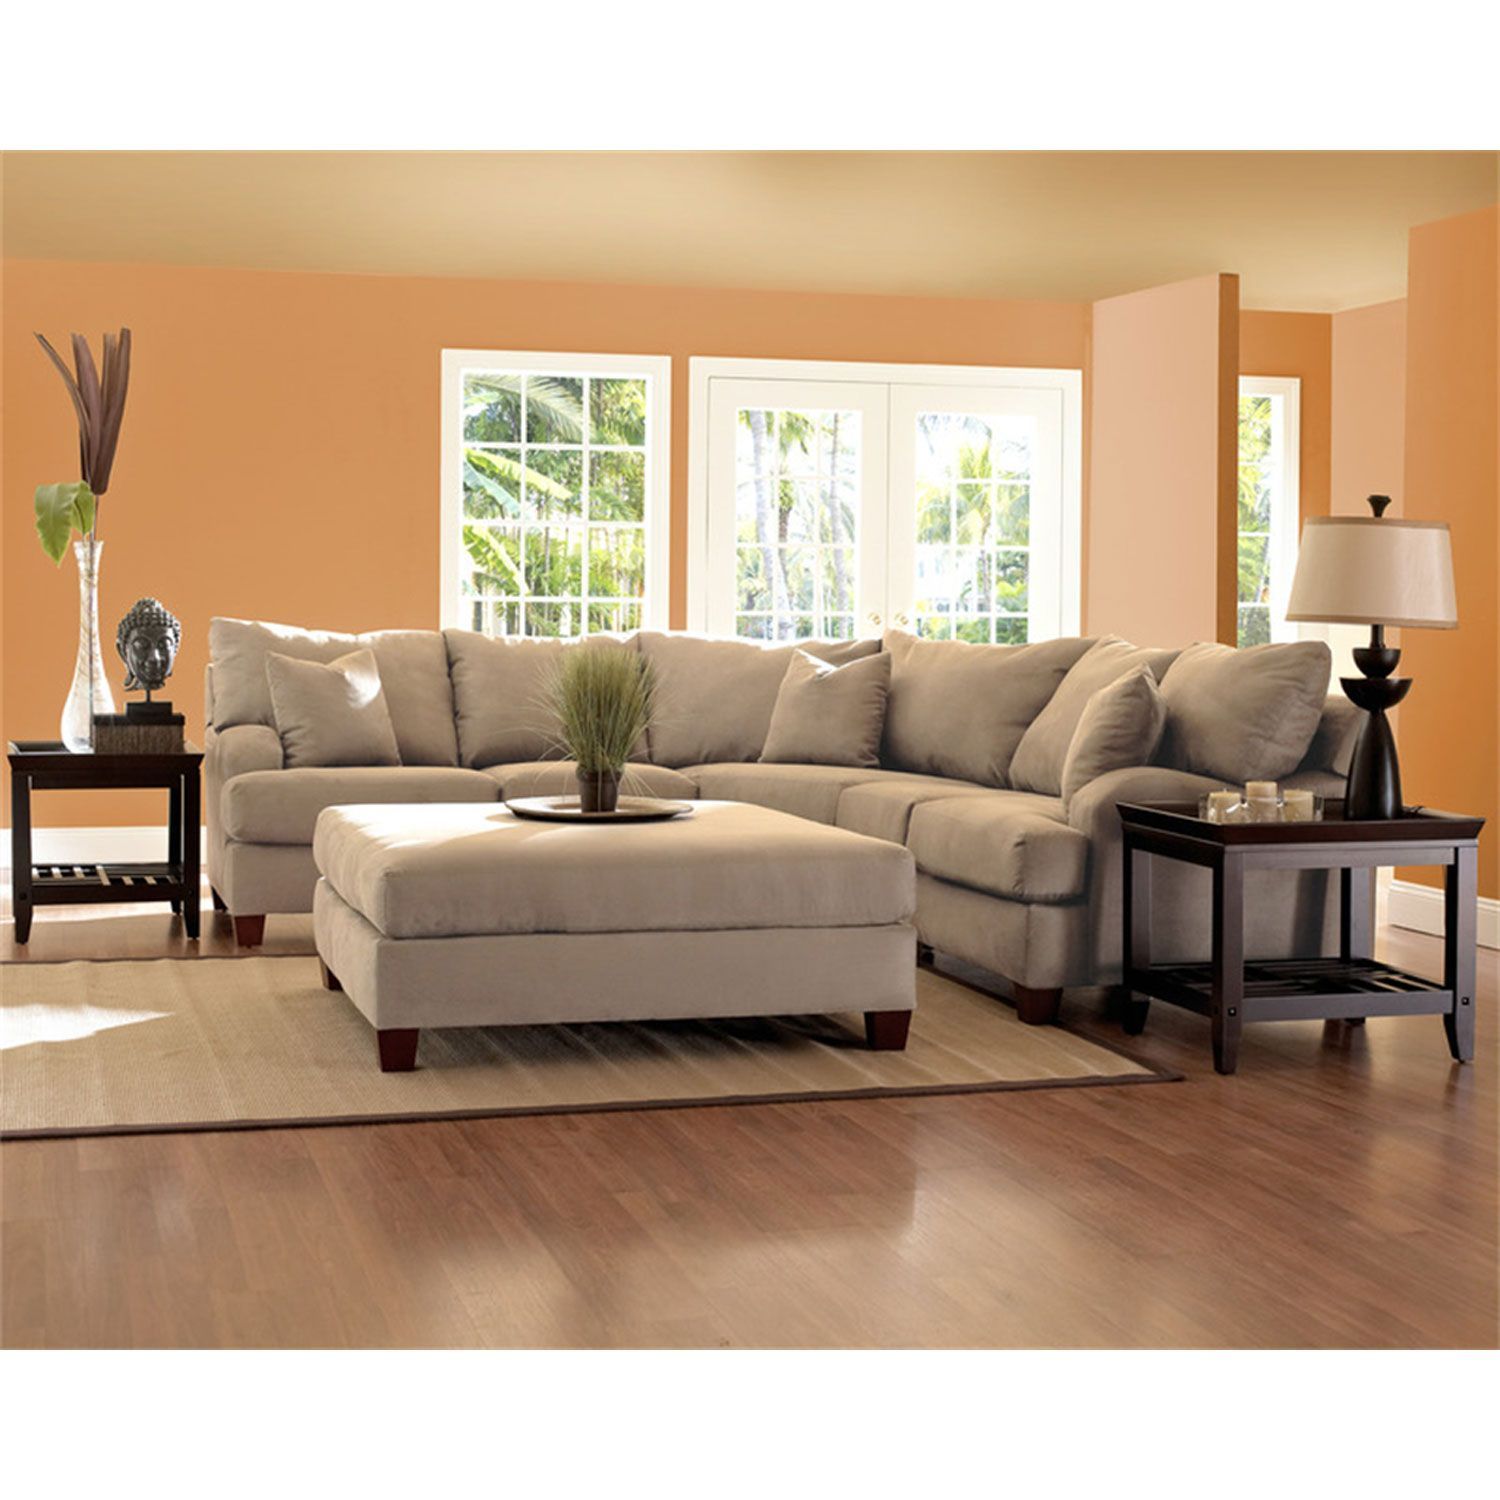 Canyon Beige Sectional Sectional Sofas Sofas & Sectionals Living Room For Small L Shaped Sectional Sofas In Beige (Gallery 14 of 21)